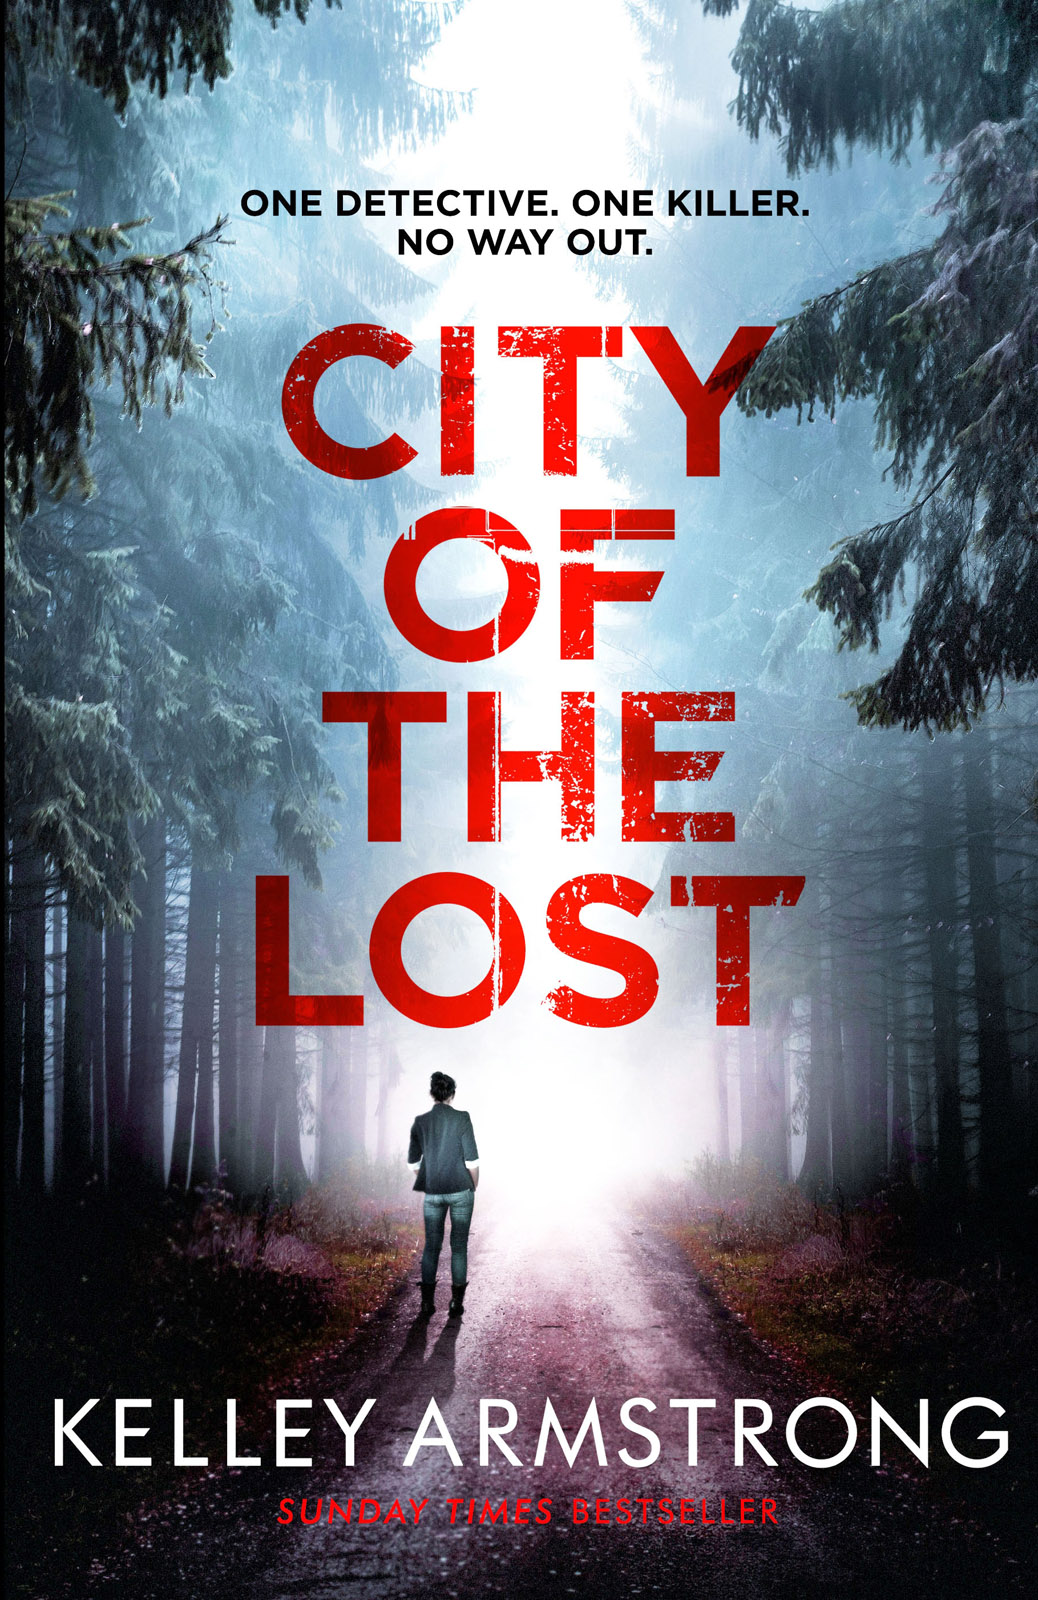 City of the Lost (2015) by Kelley Armstrong